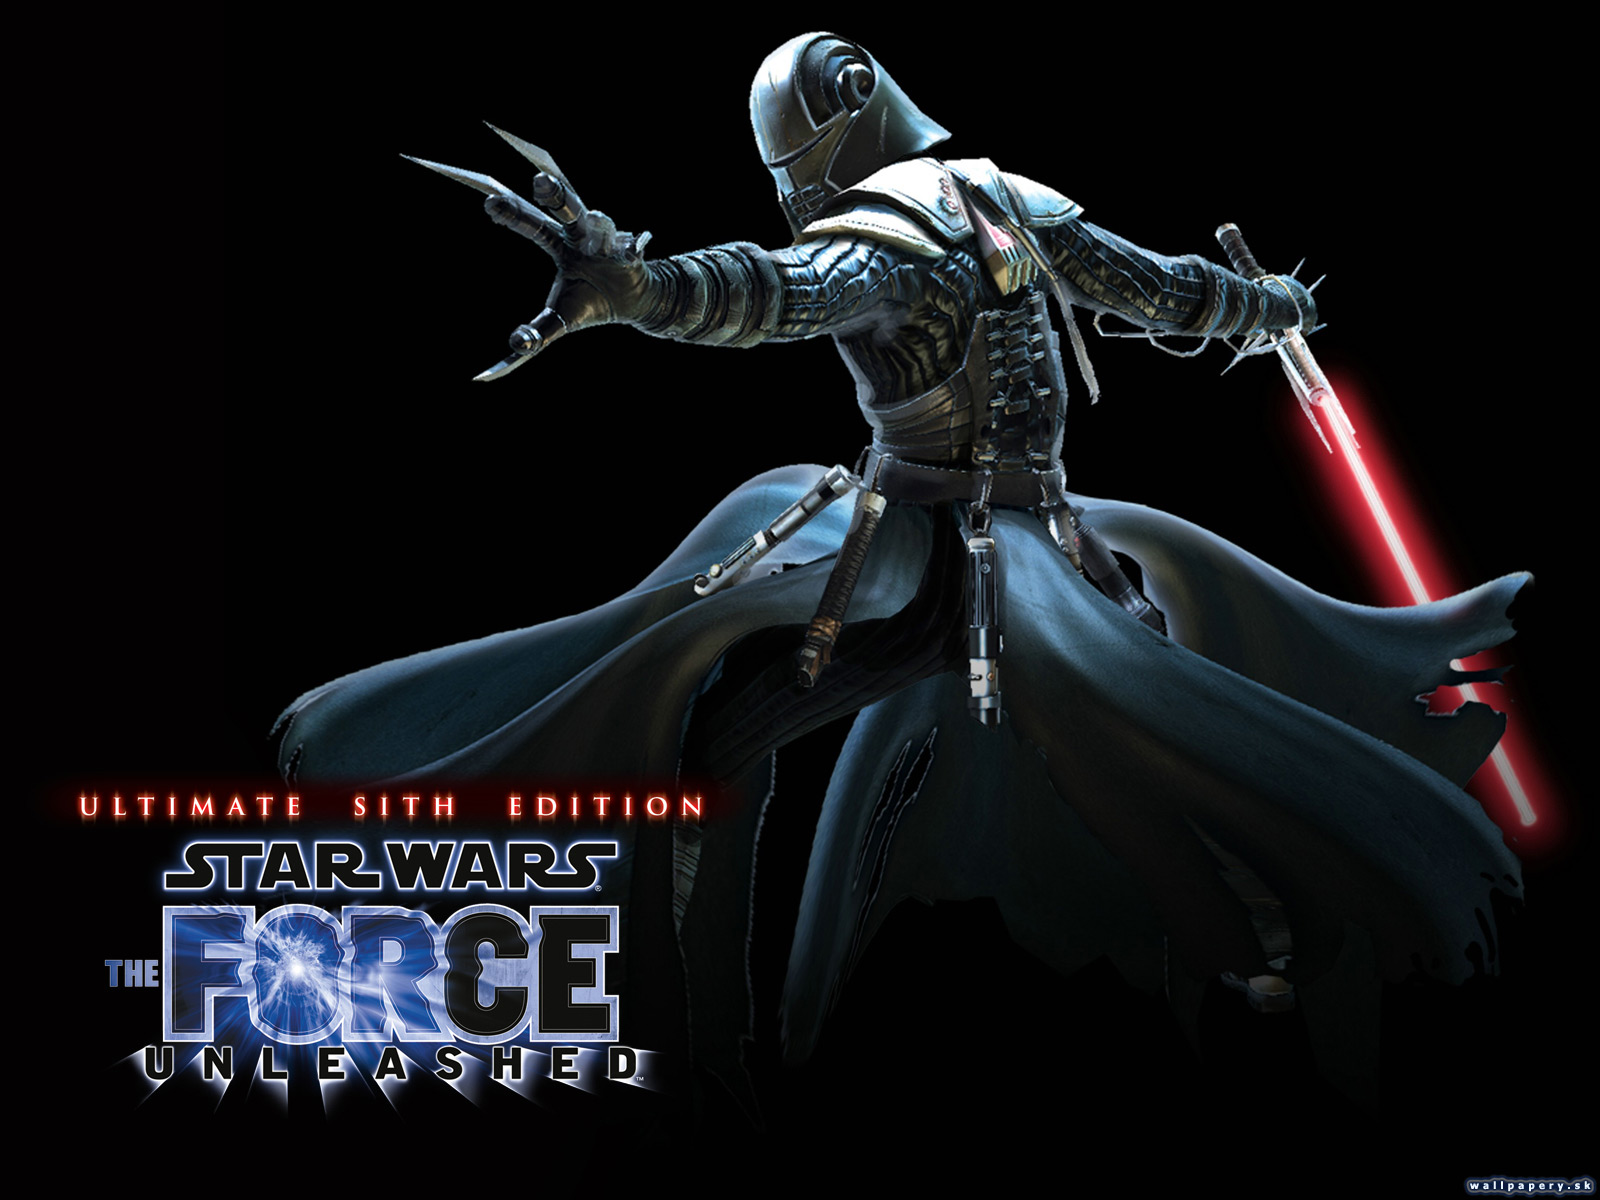 Star Wars: The Force Unleashed - Ultimate Sith Edition - wallpaper 1